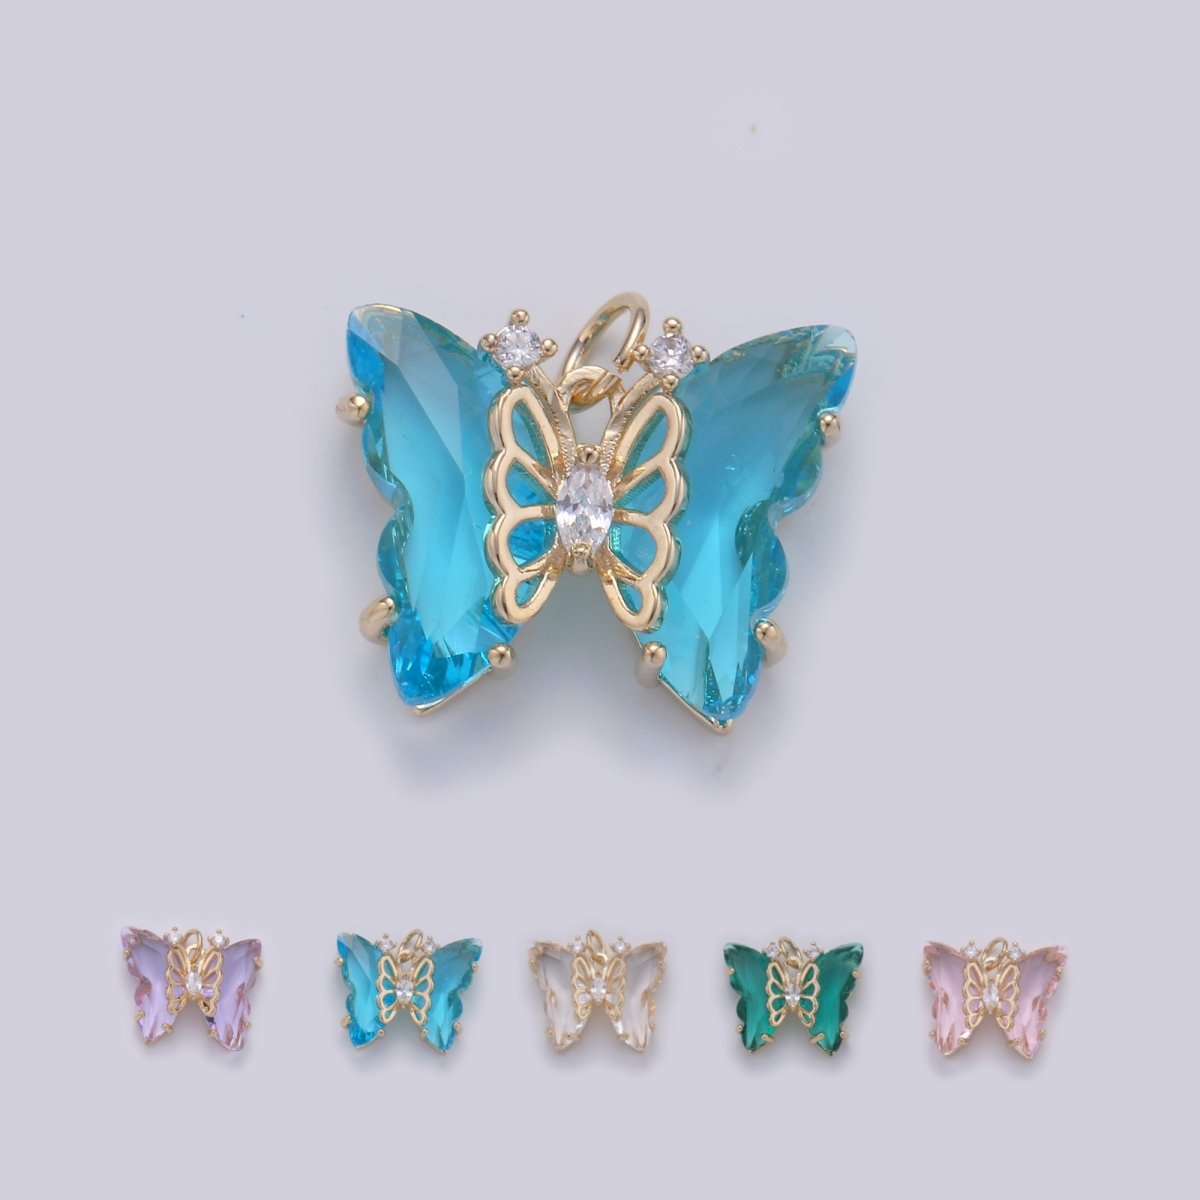 Pink Mariposa Butterfly Charm Acrylic Butterfly Charm Glass Pendant for Necklace Earring Bracelet Component in 14k Gold Filled Tarnish Free D-520 - D-524 - DLUXCA